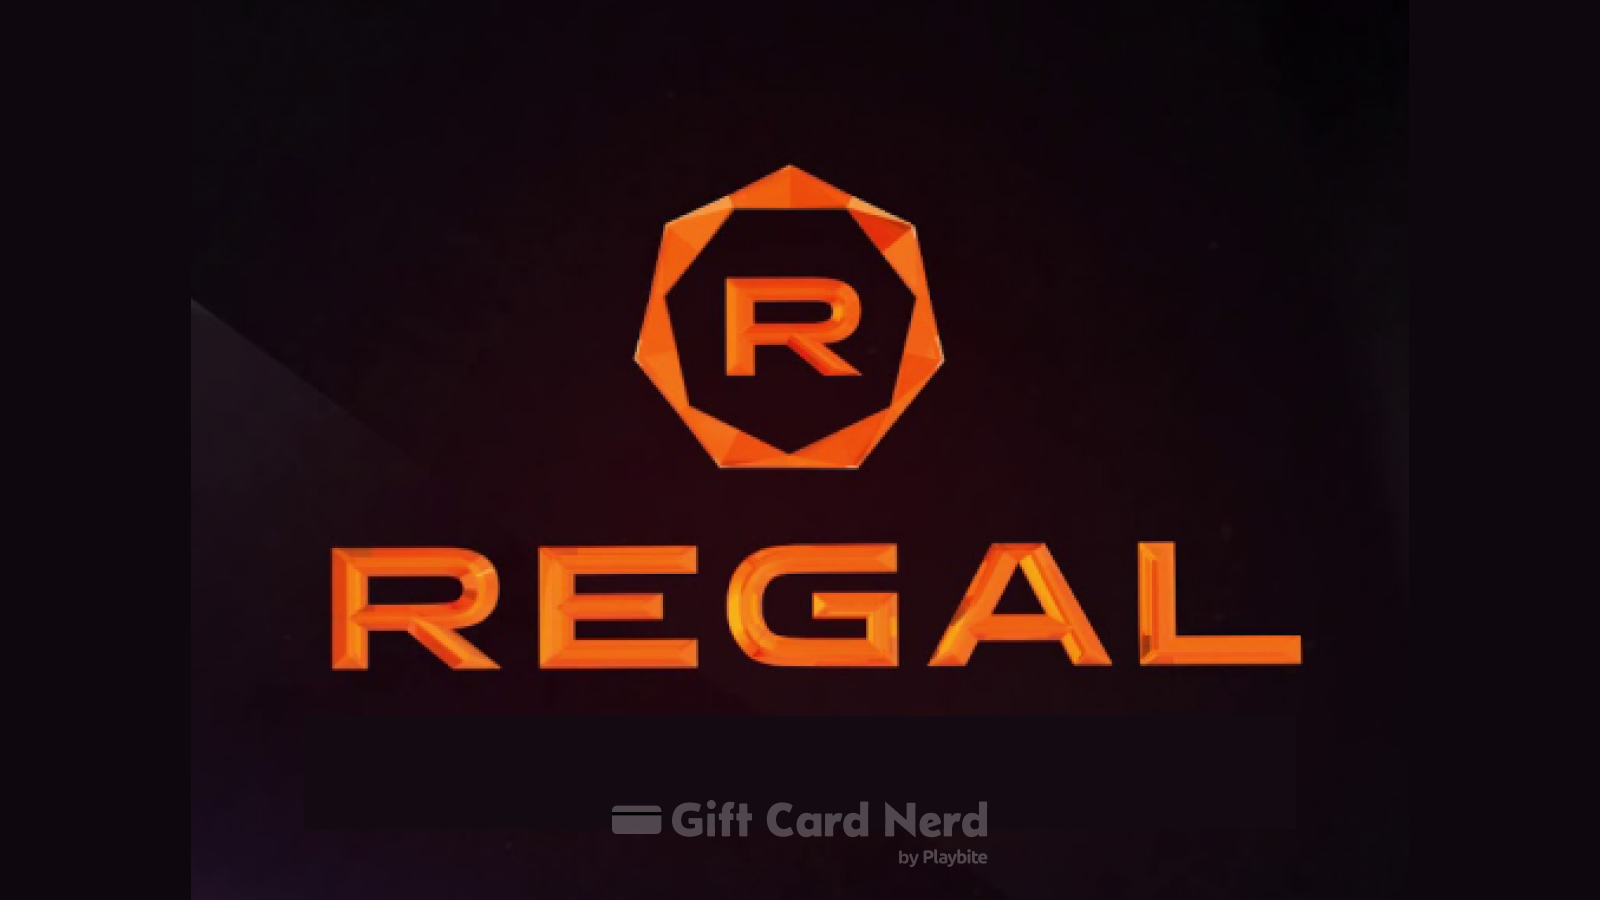 Where to Buy Regal Gift Cards: CVS or Someplace Else?